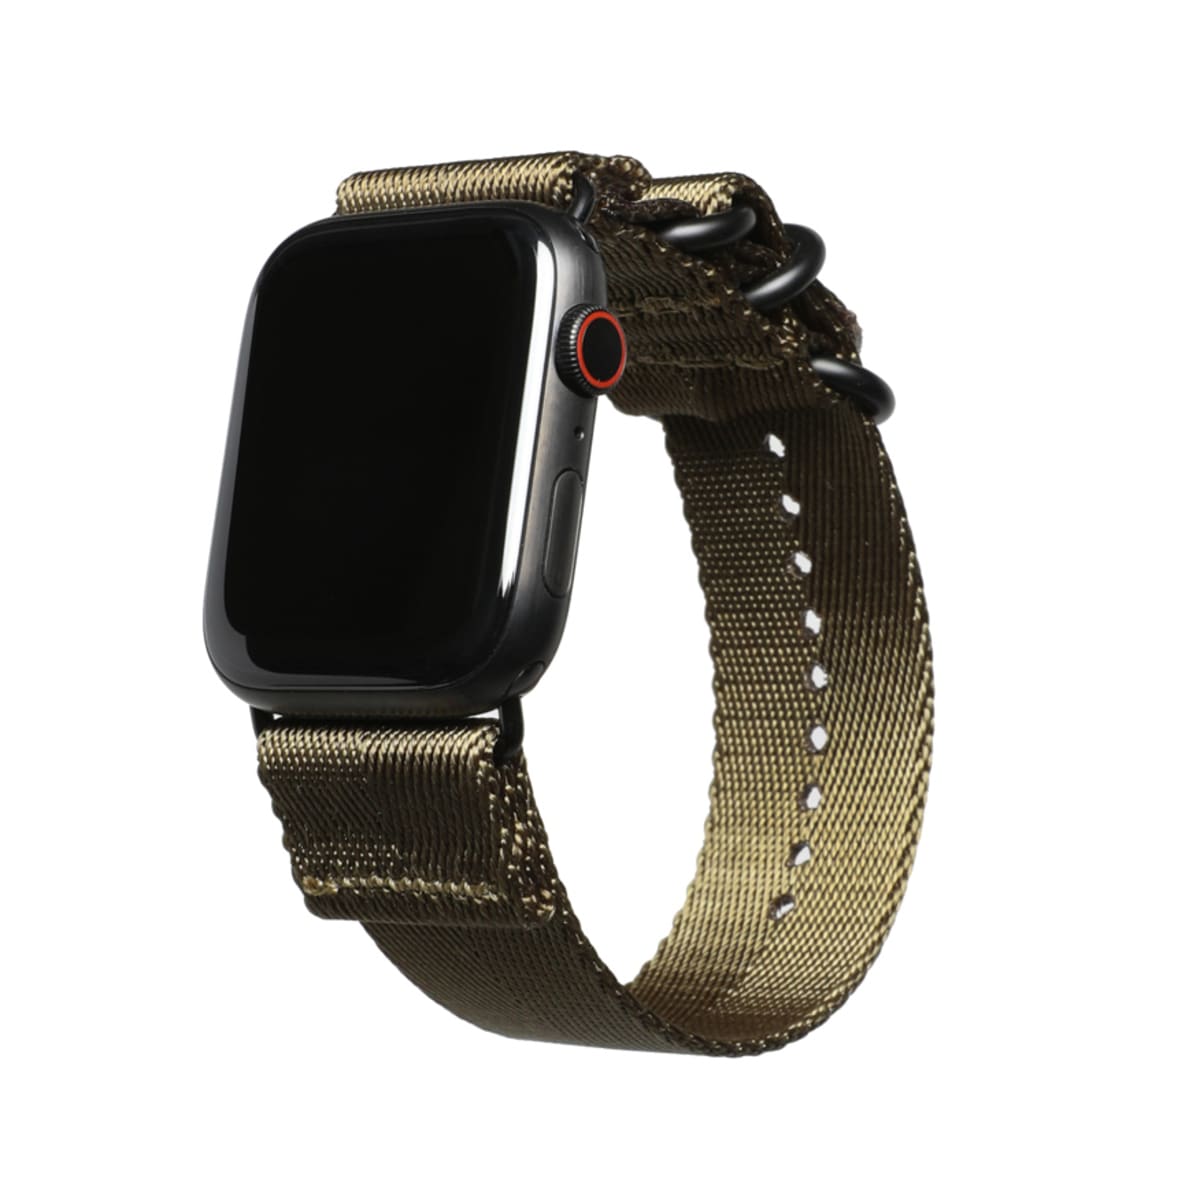 DSPTCH launches a new range of Apple Watch straps - Acquire